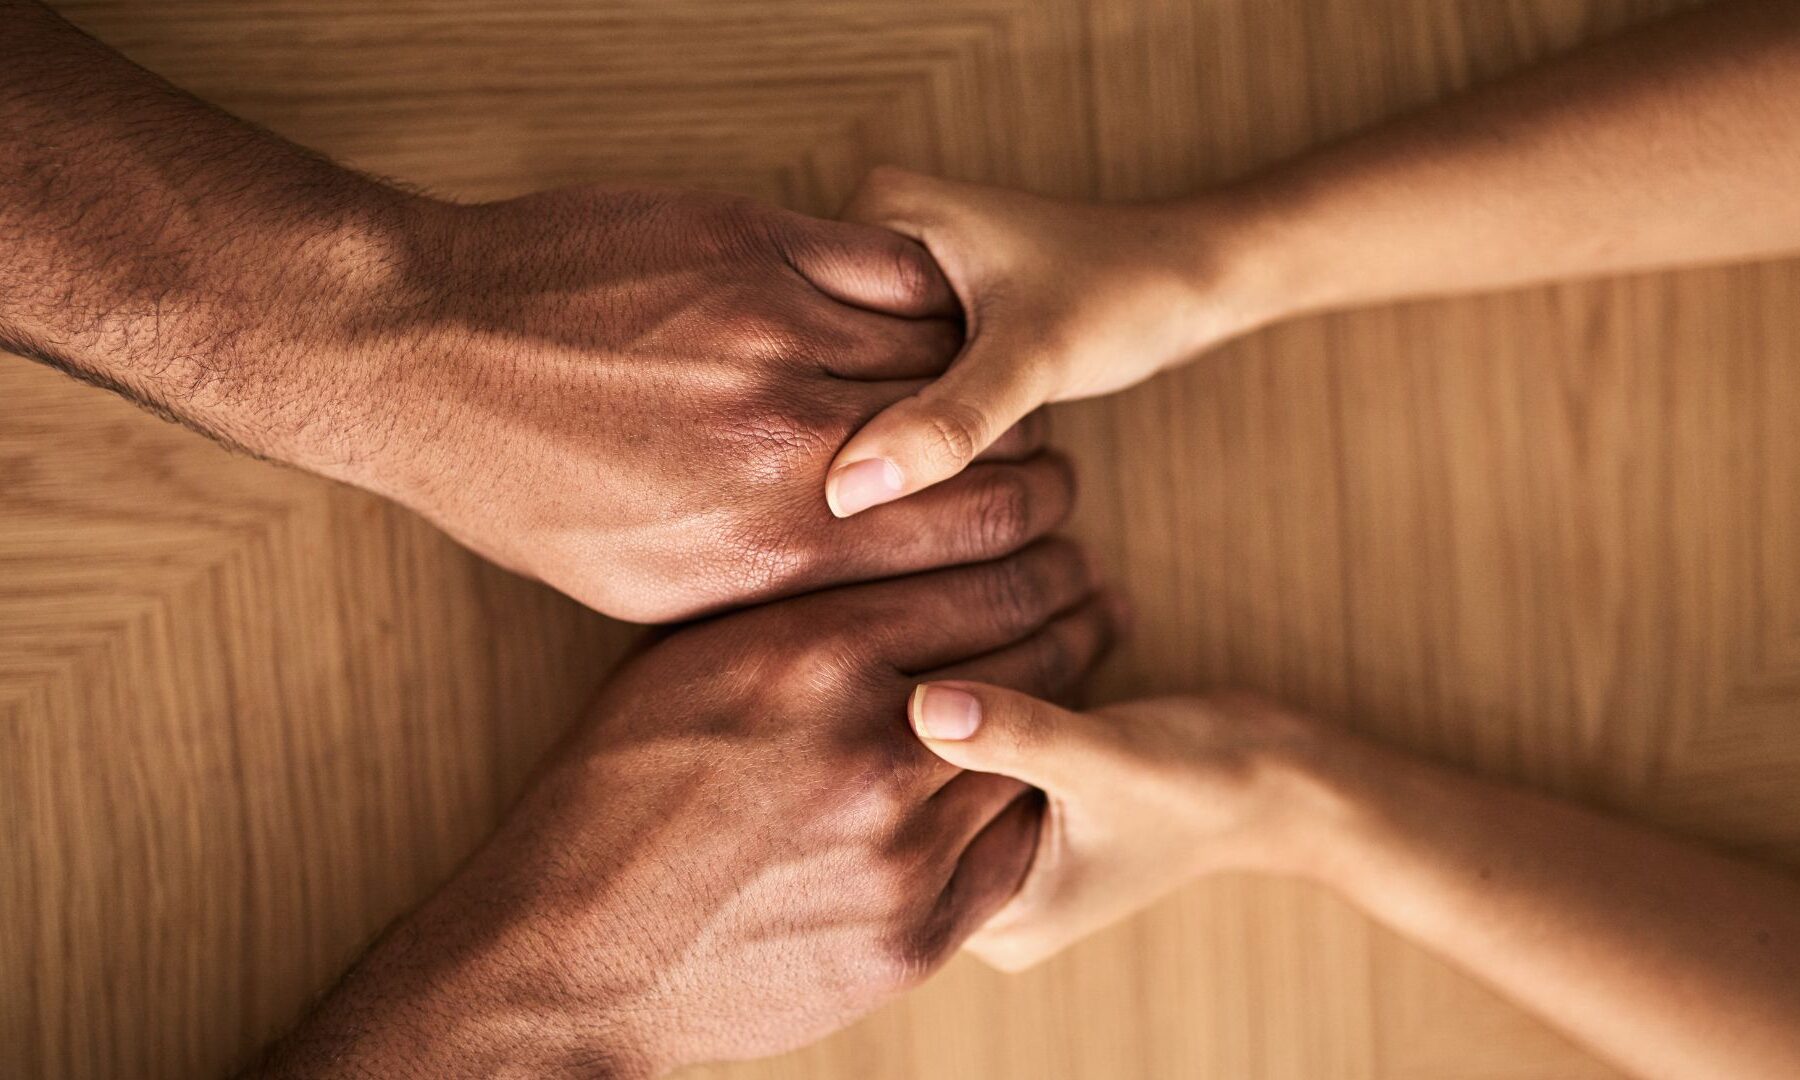 holding hands across a table compassion leadership kindness